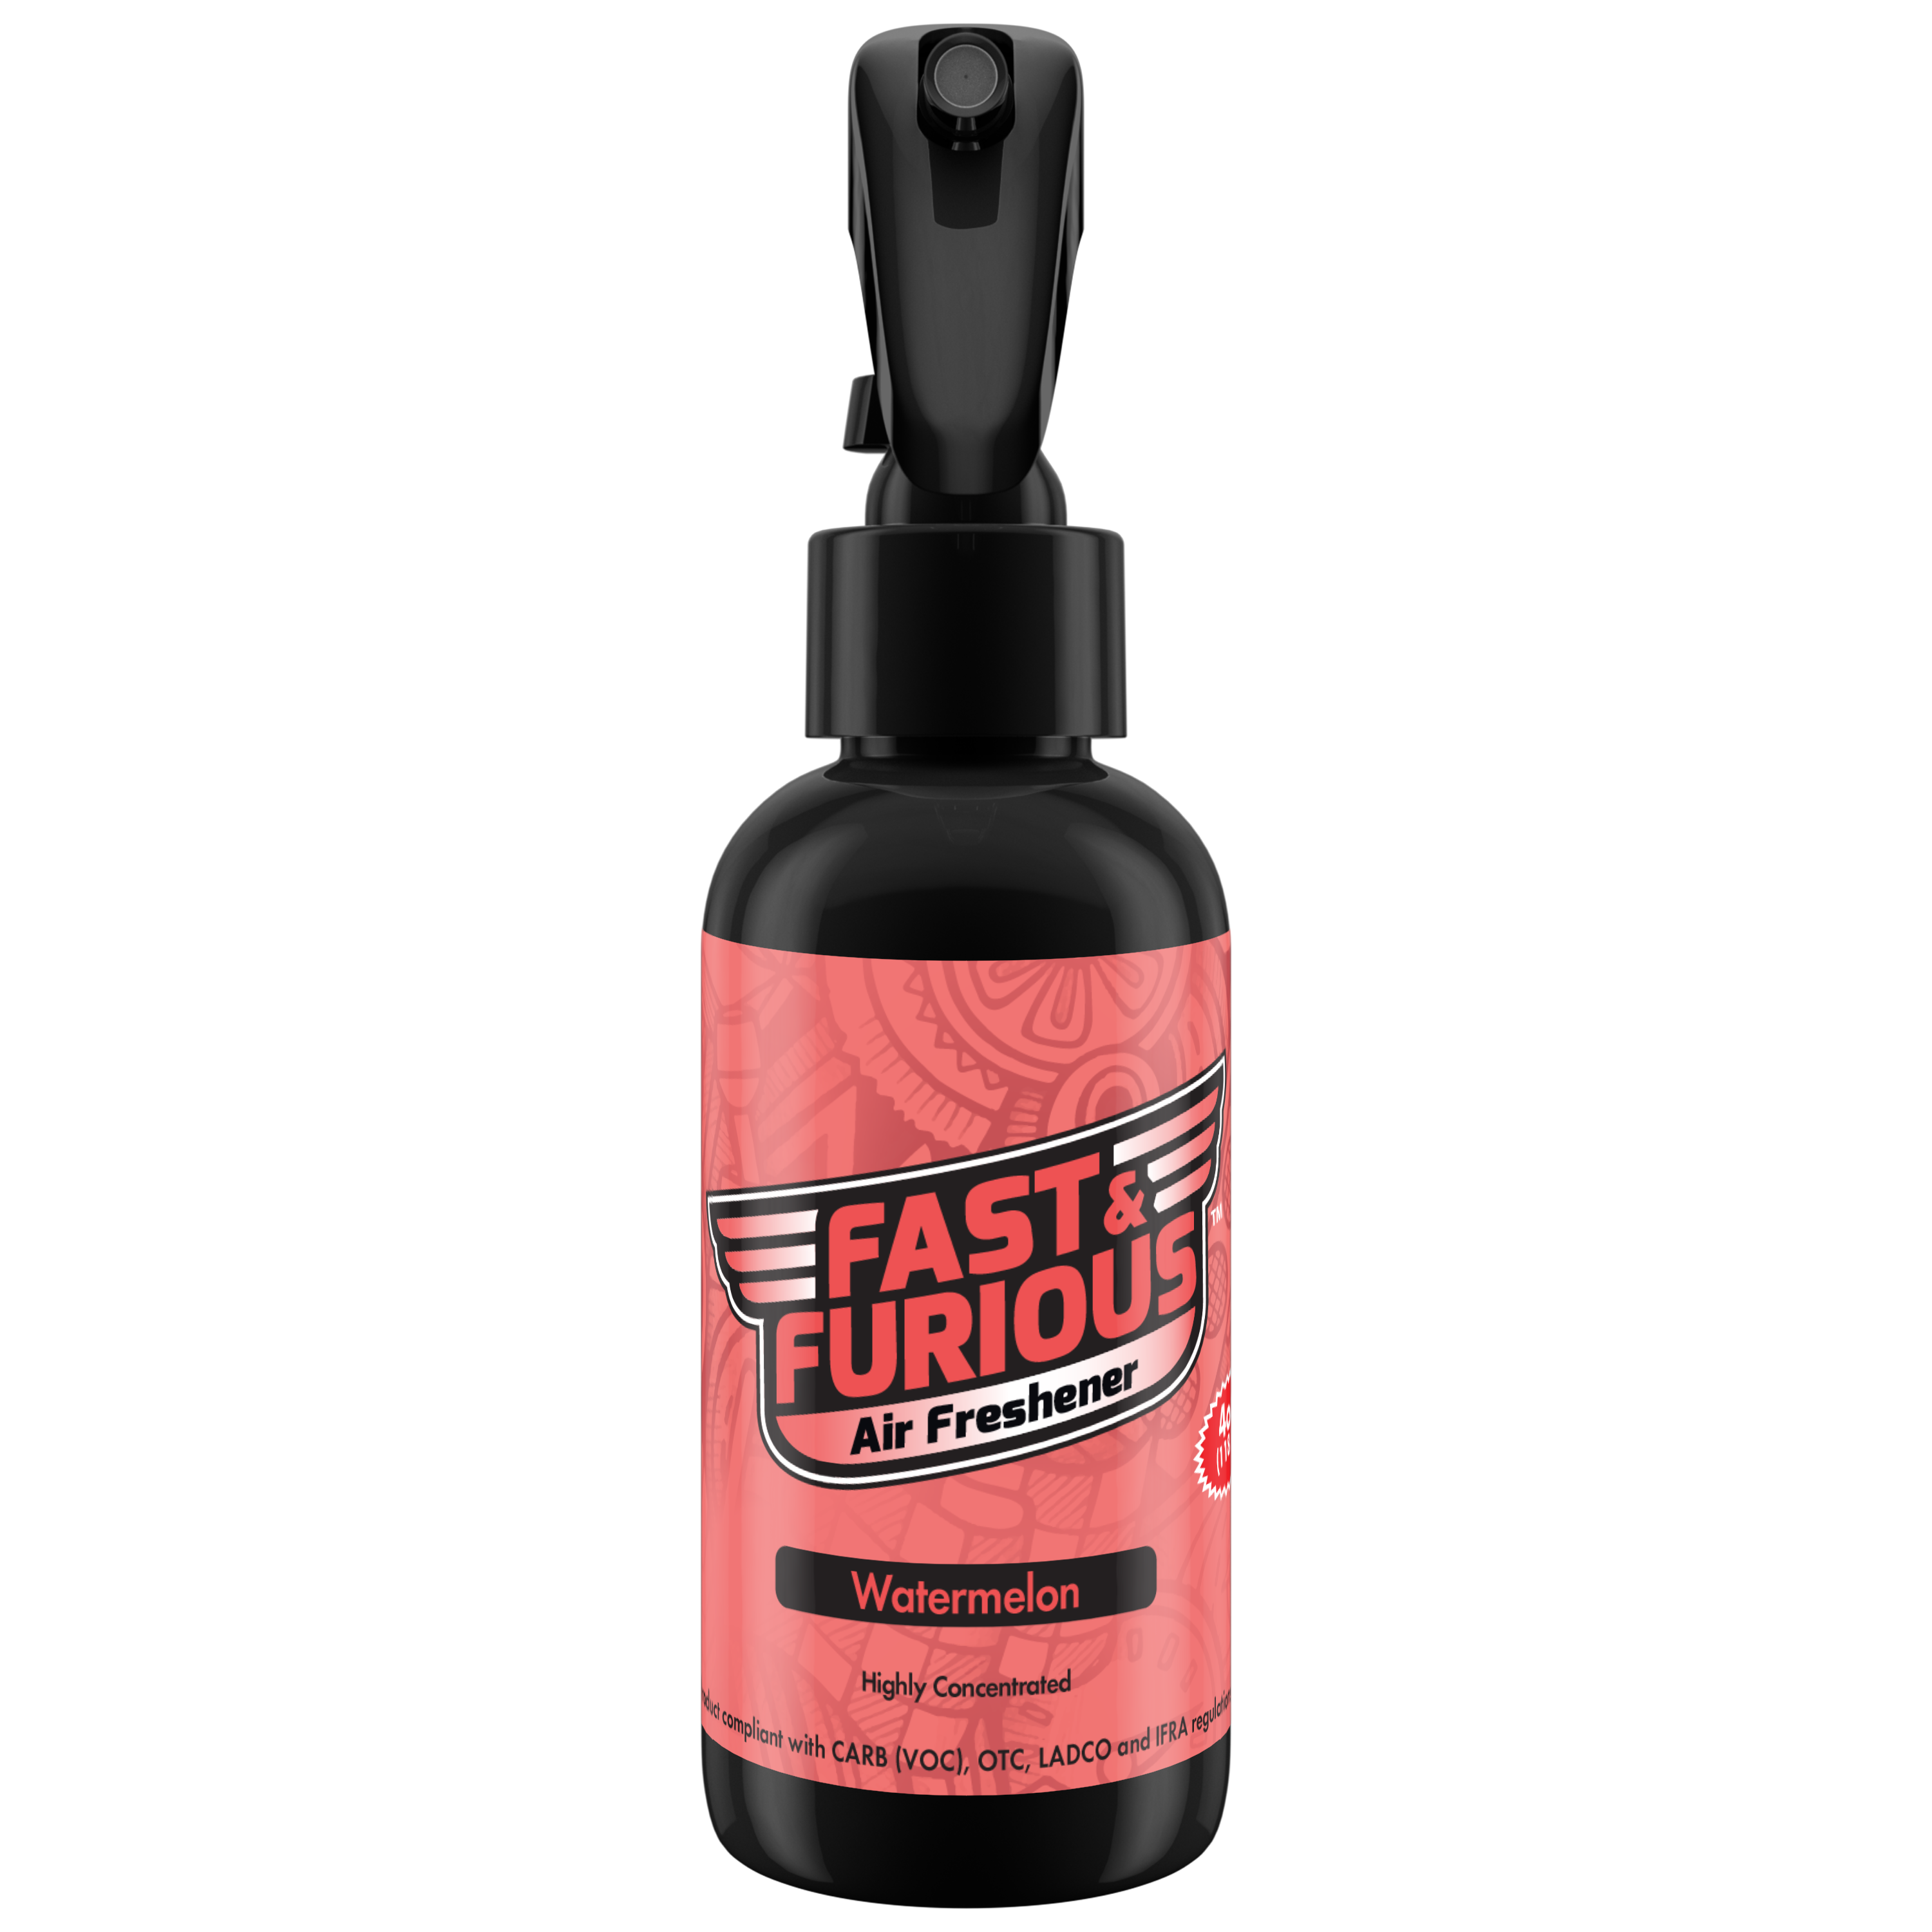 Fast and Furious Air Freshener - Watermelon Scent